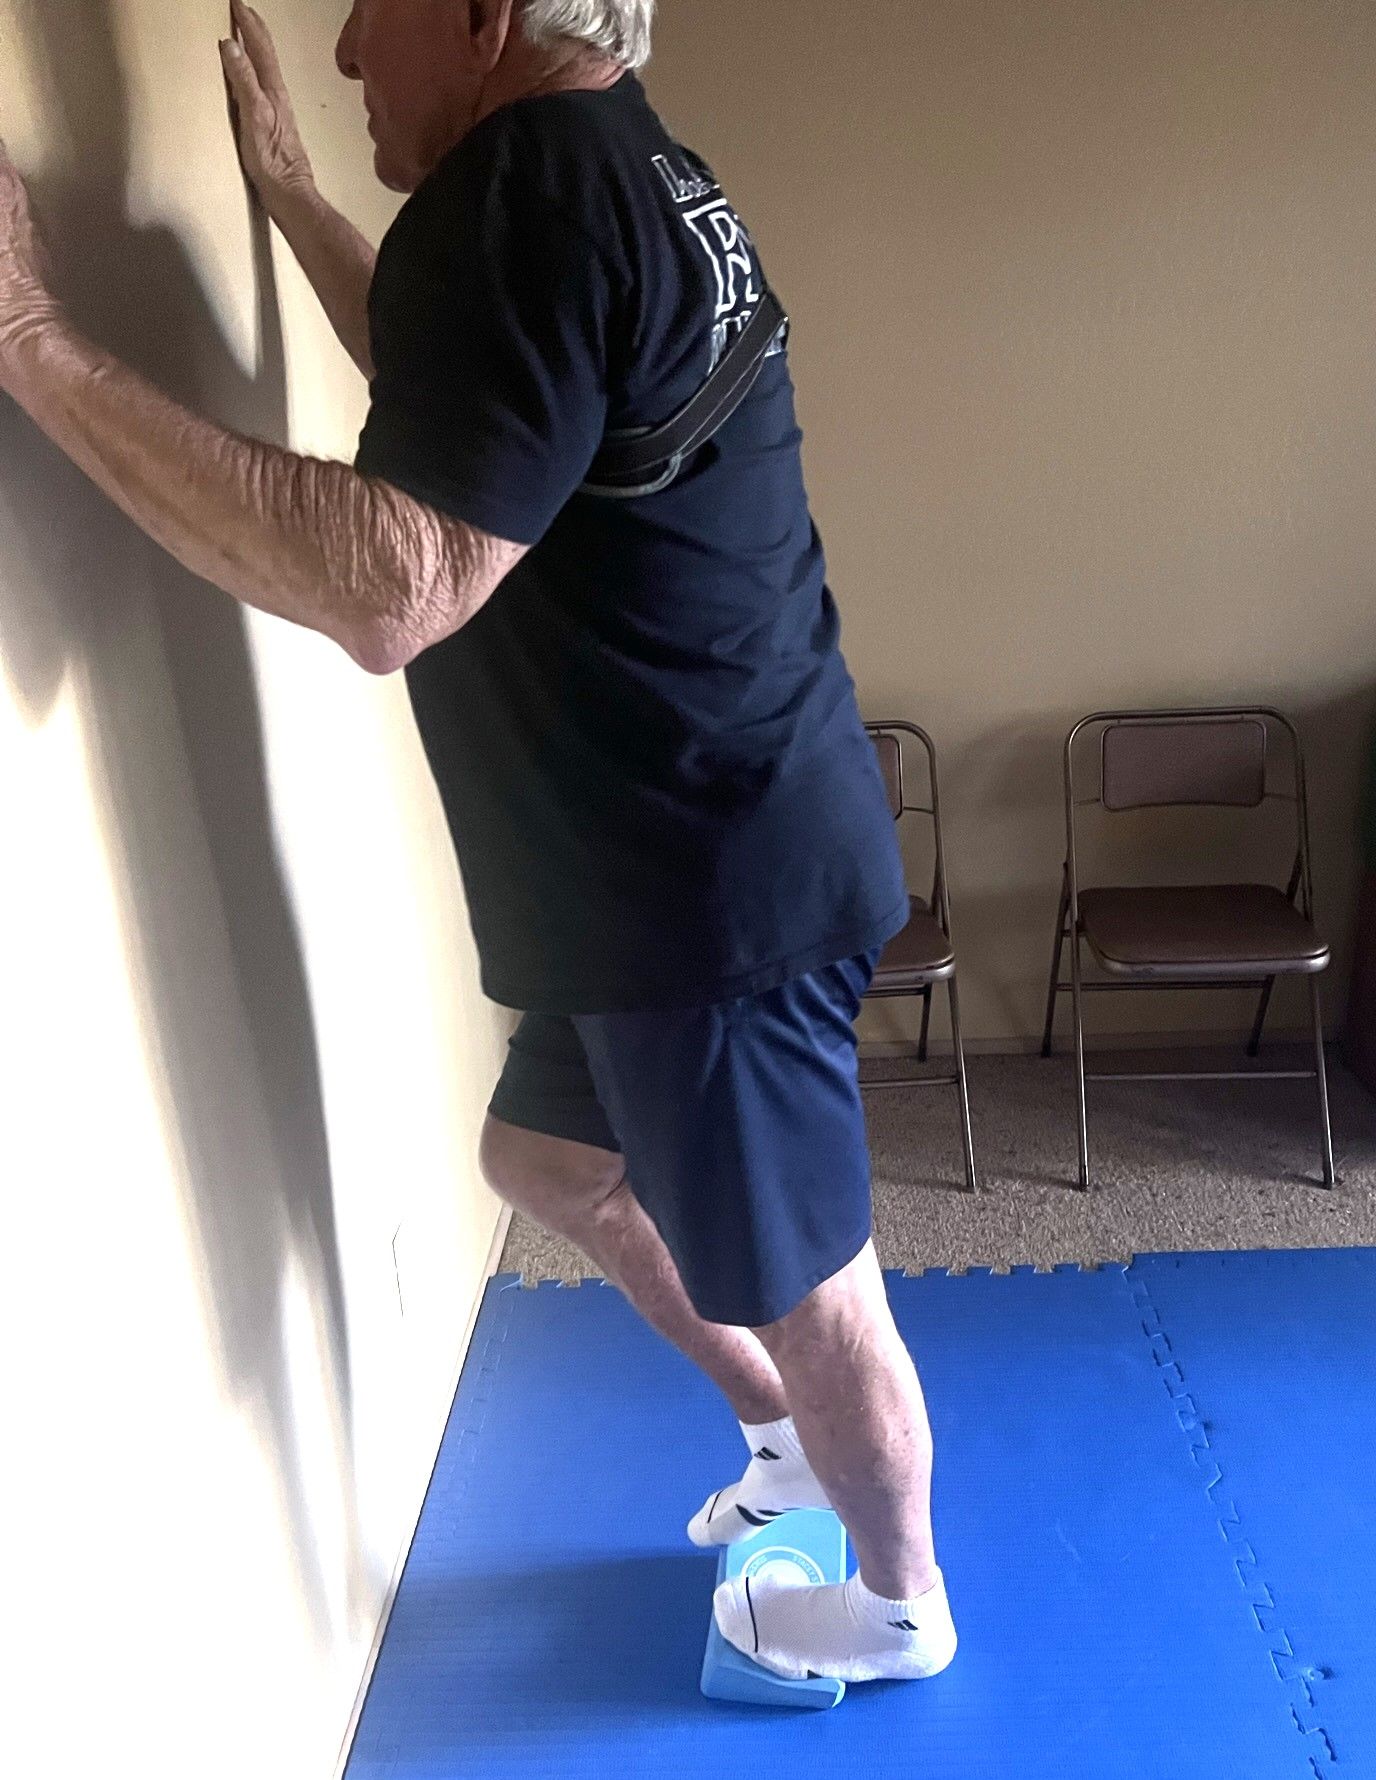 Man standing on a yoga block stretching calf & foot out